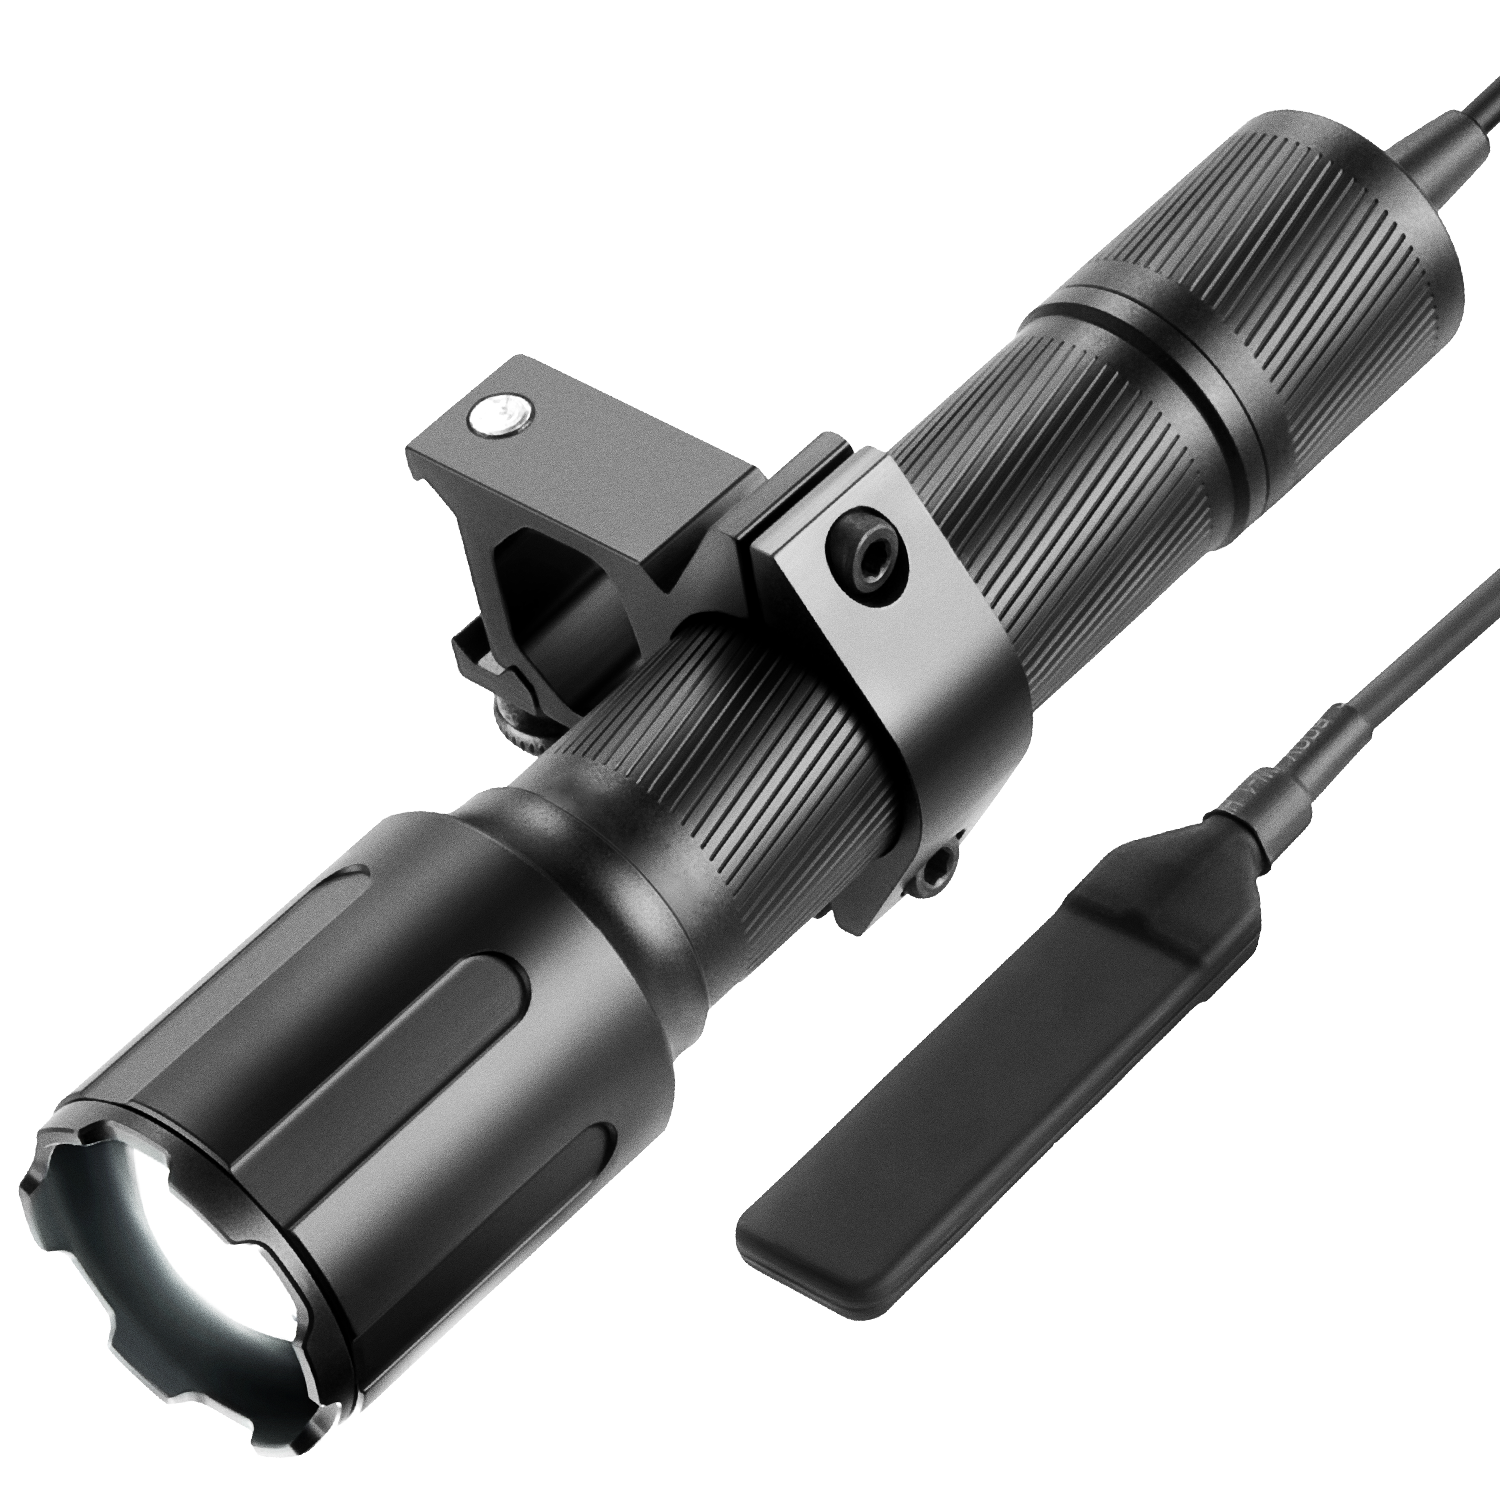 3000 Lumen Tactical Flashlight with Pressure Switch & Mounting Rings, 5 Brightness Levels & Strobe Mode